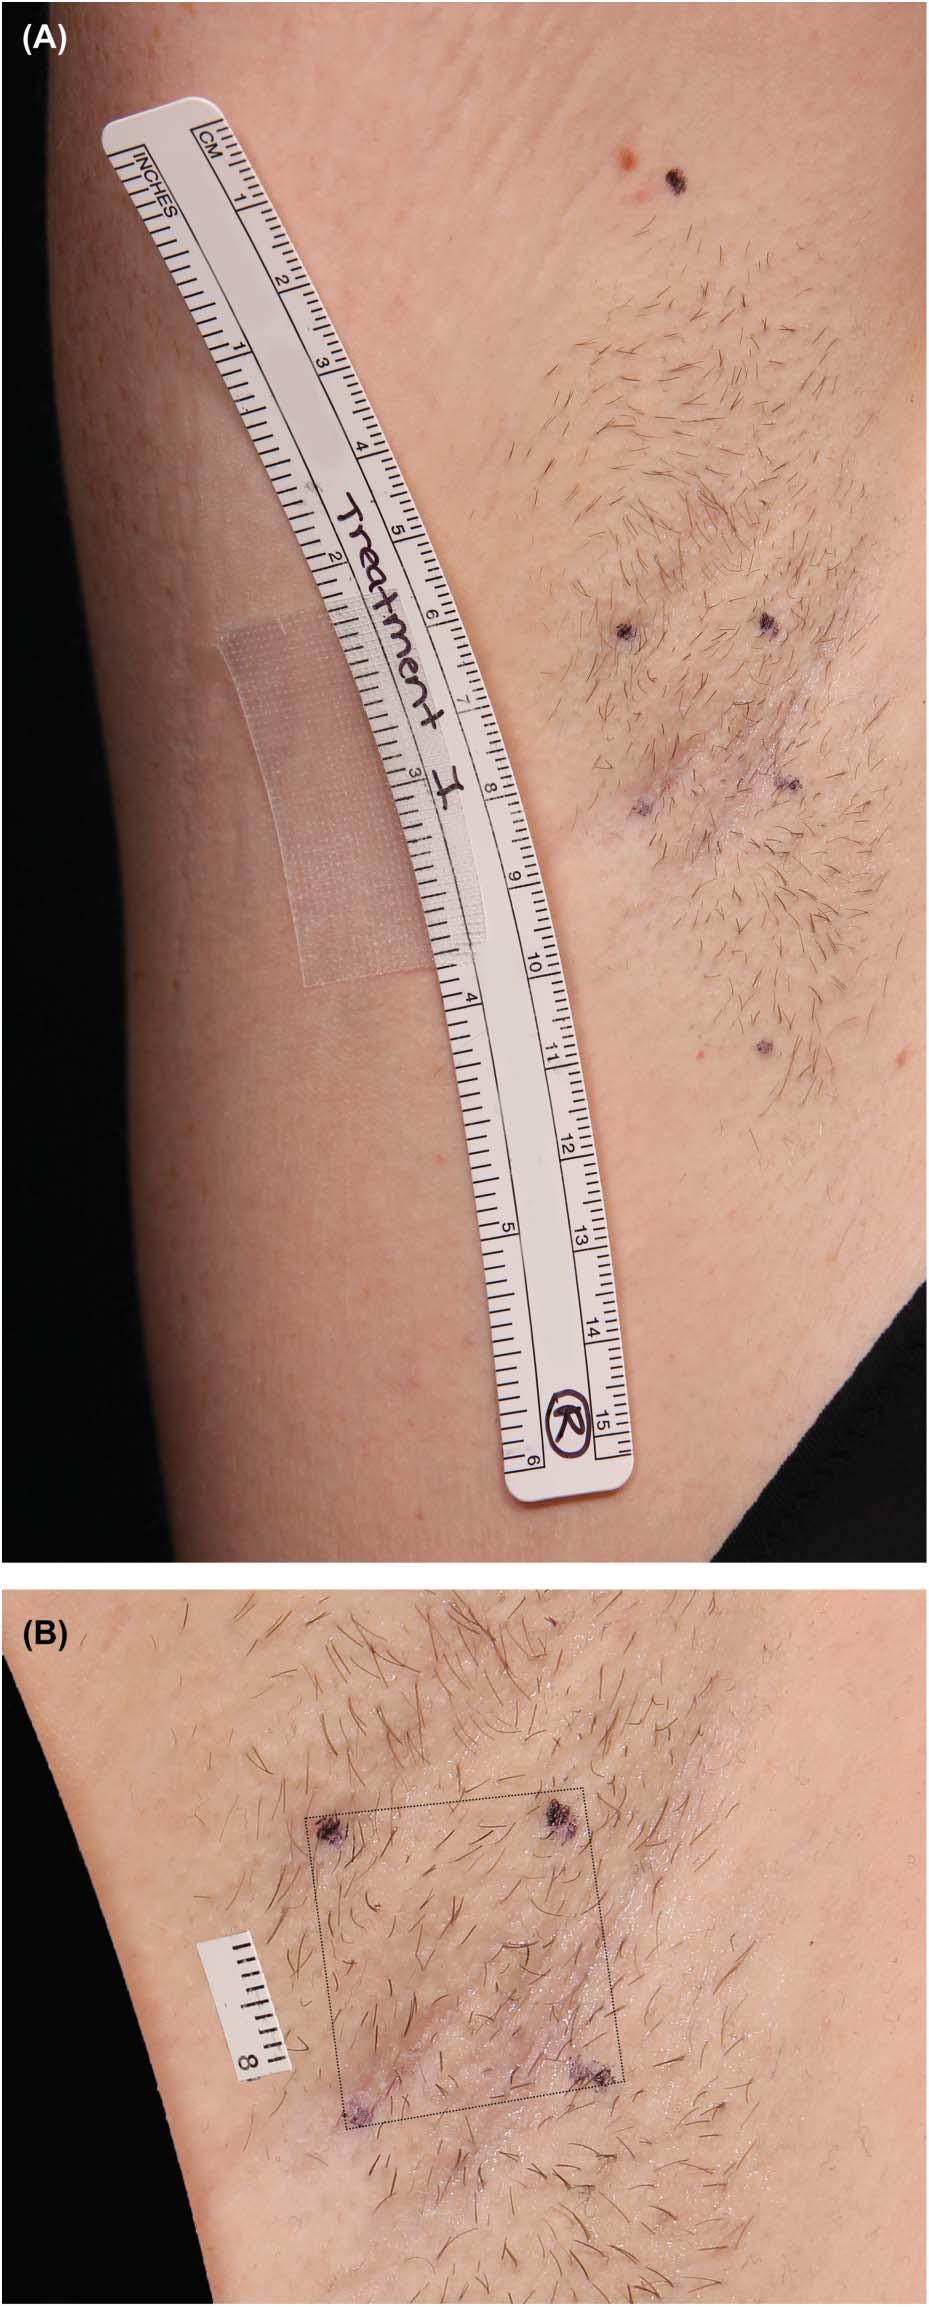 BRAUER ET AL Treatments and Study Visits The treatments were provided by a noninvasive device with integrated surface cooling of the skin that delivers focused microwave energy to the lower part of